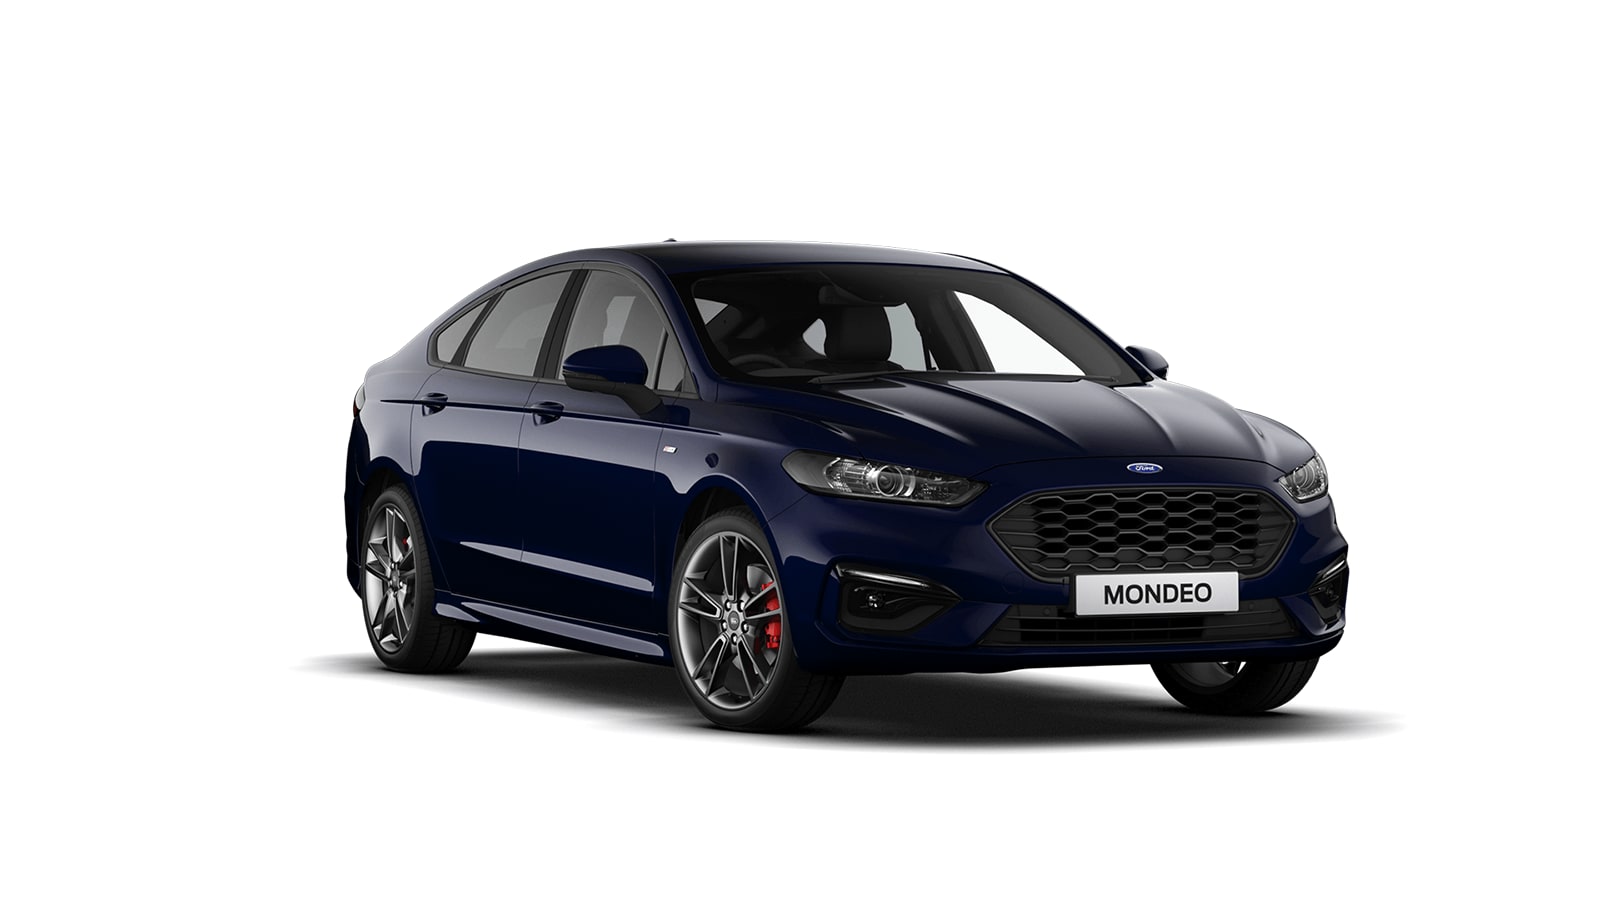 Ford Mondeo ST-Line Edition 2.0L EcoBlue 190PS at RGR Garages